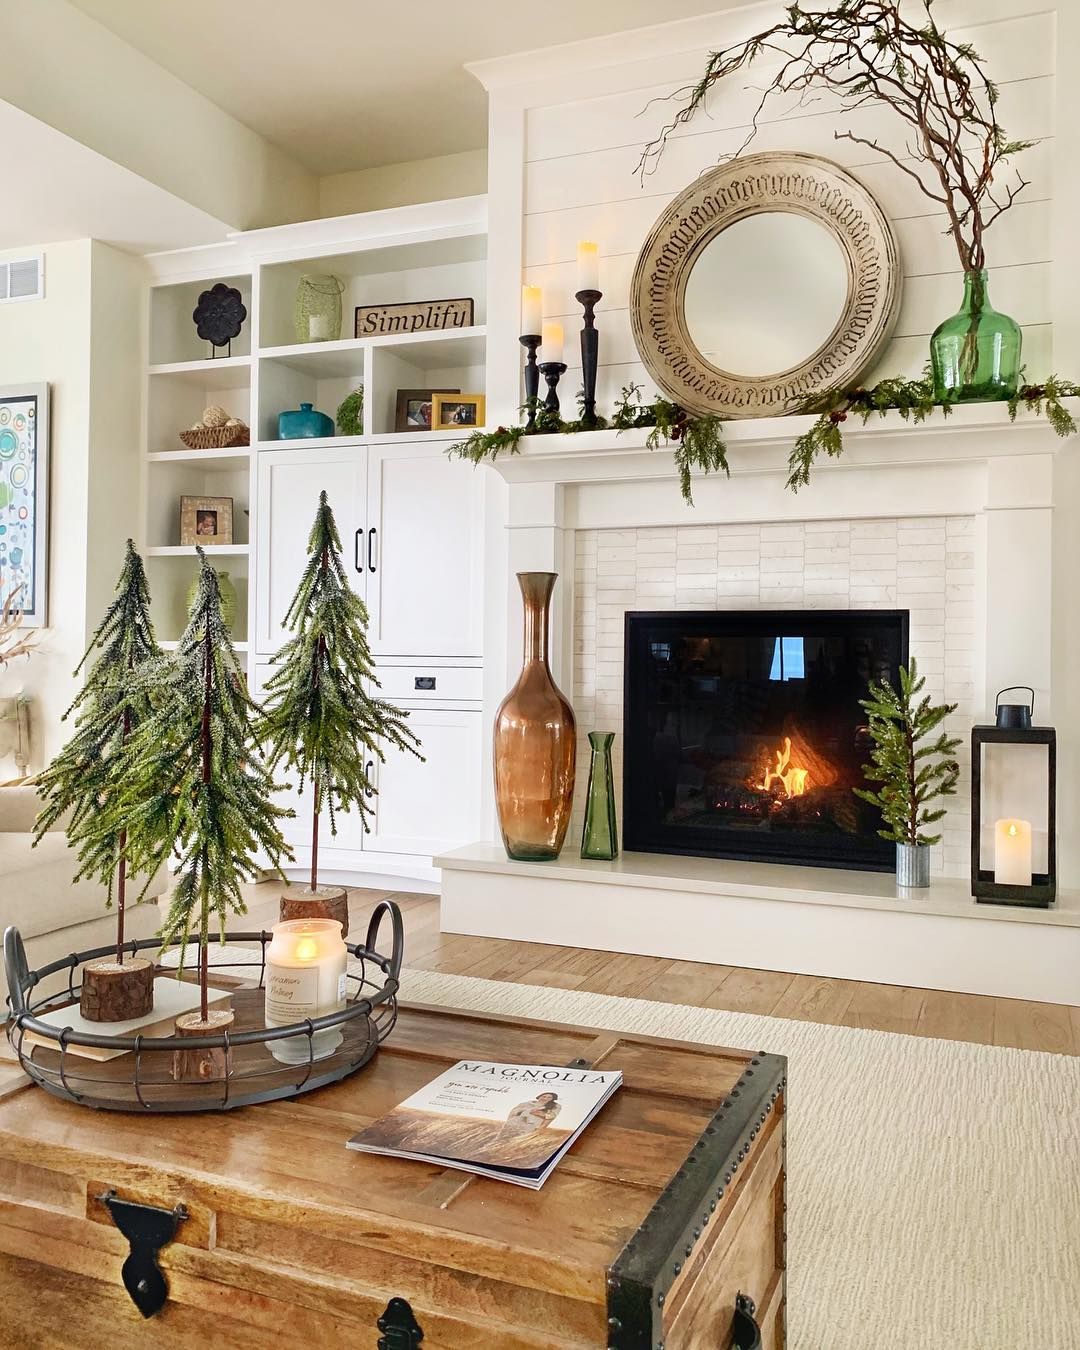 Adding A Fireplace to A Home Beautiful ð¸tracy On Instagram “thanks for Loving My Little Project I